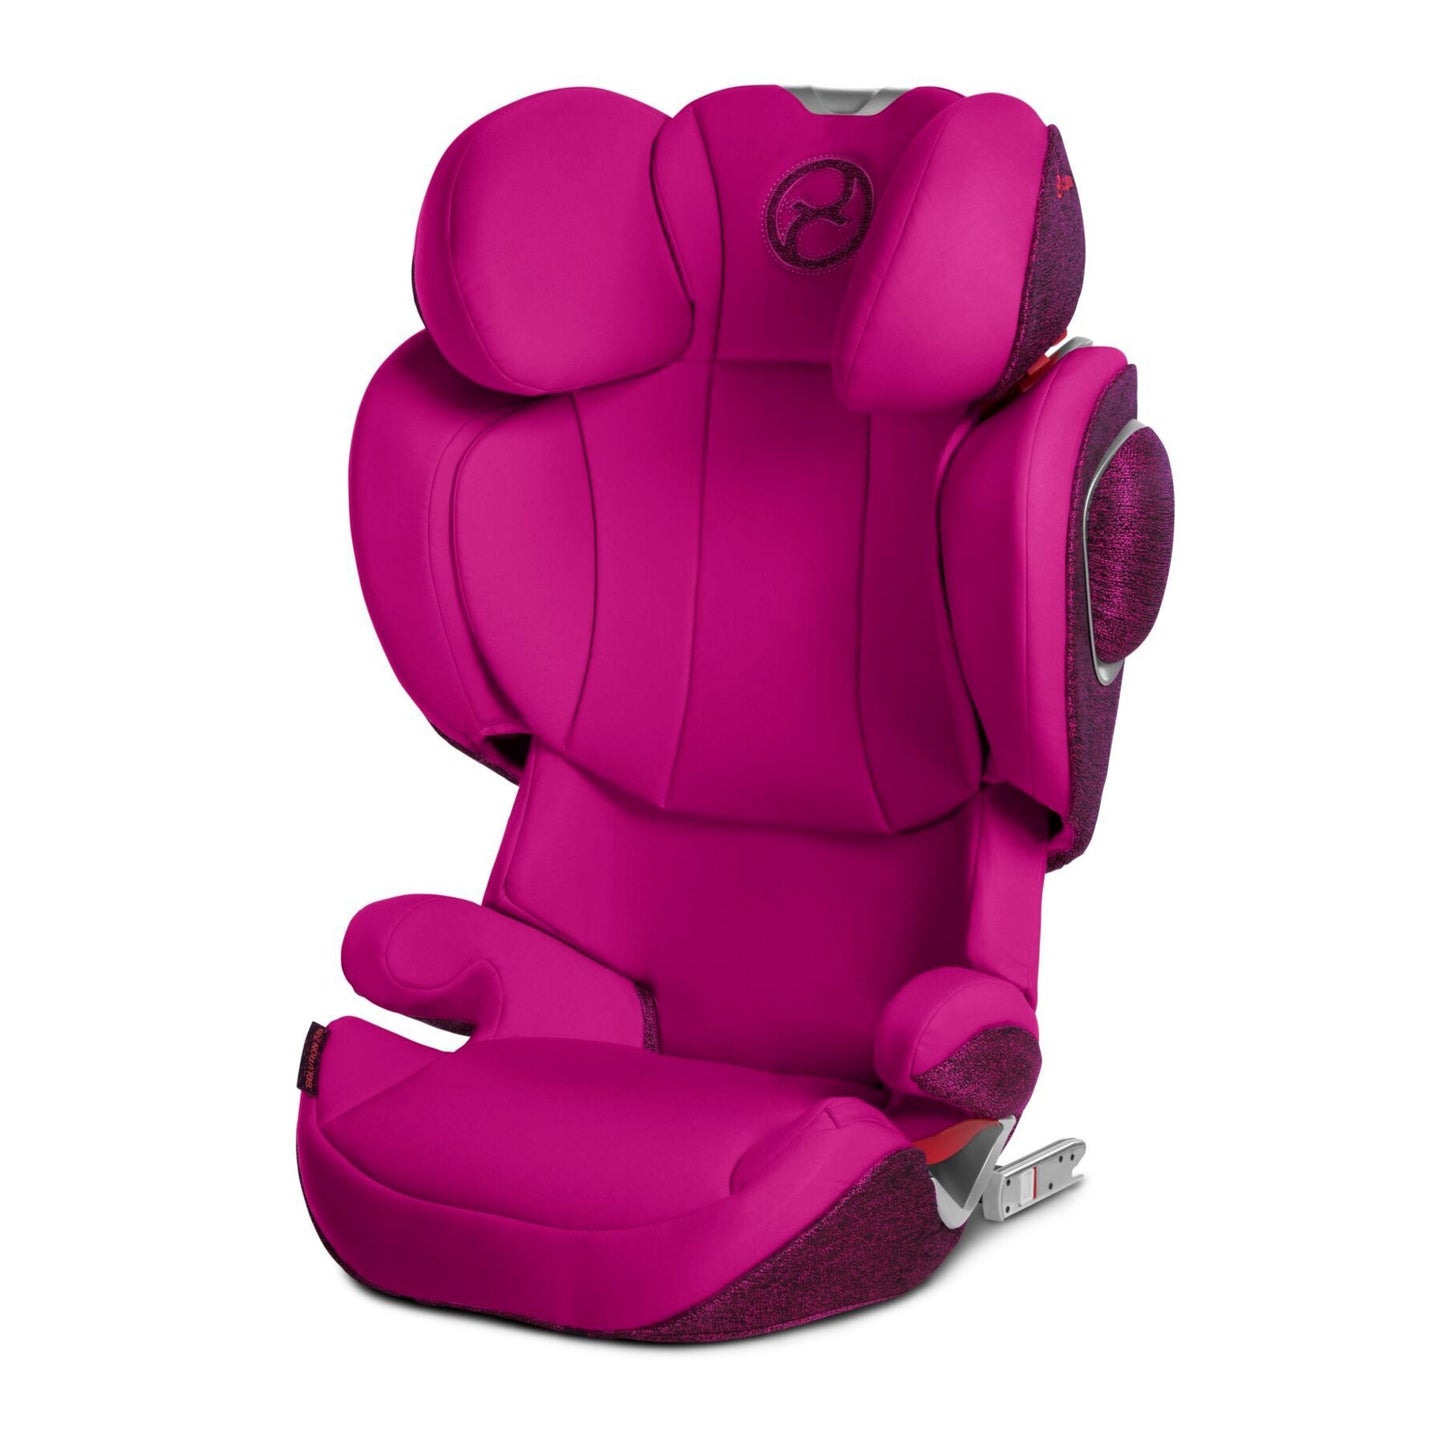 Cybex Solution Z-fix Booster Car Seat - Passion Pink